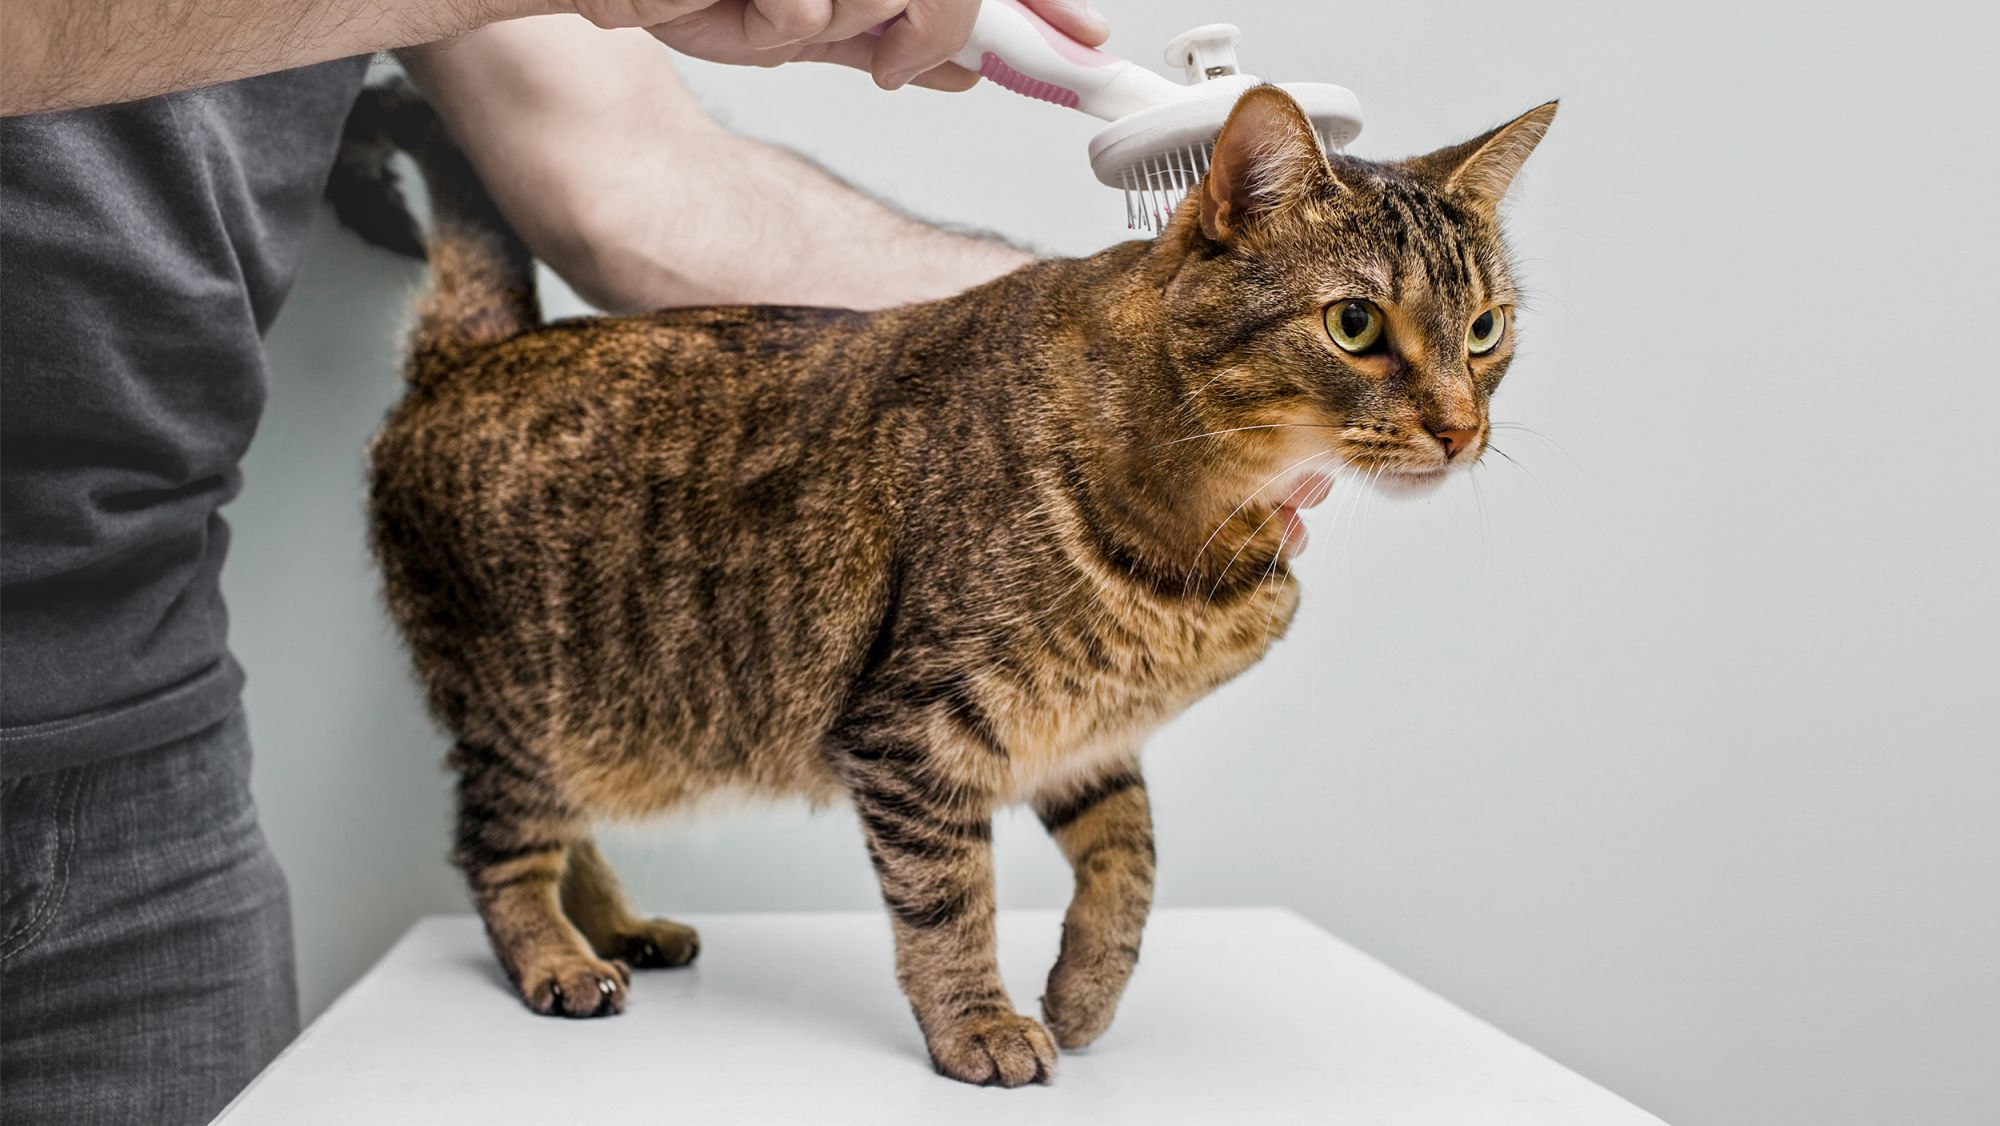 Adult cat standing on a table being brushed by its owner.